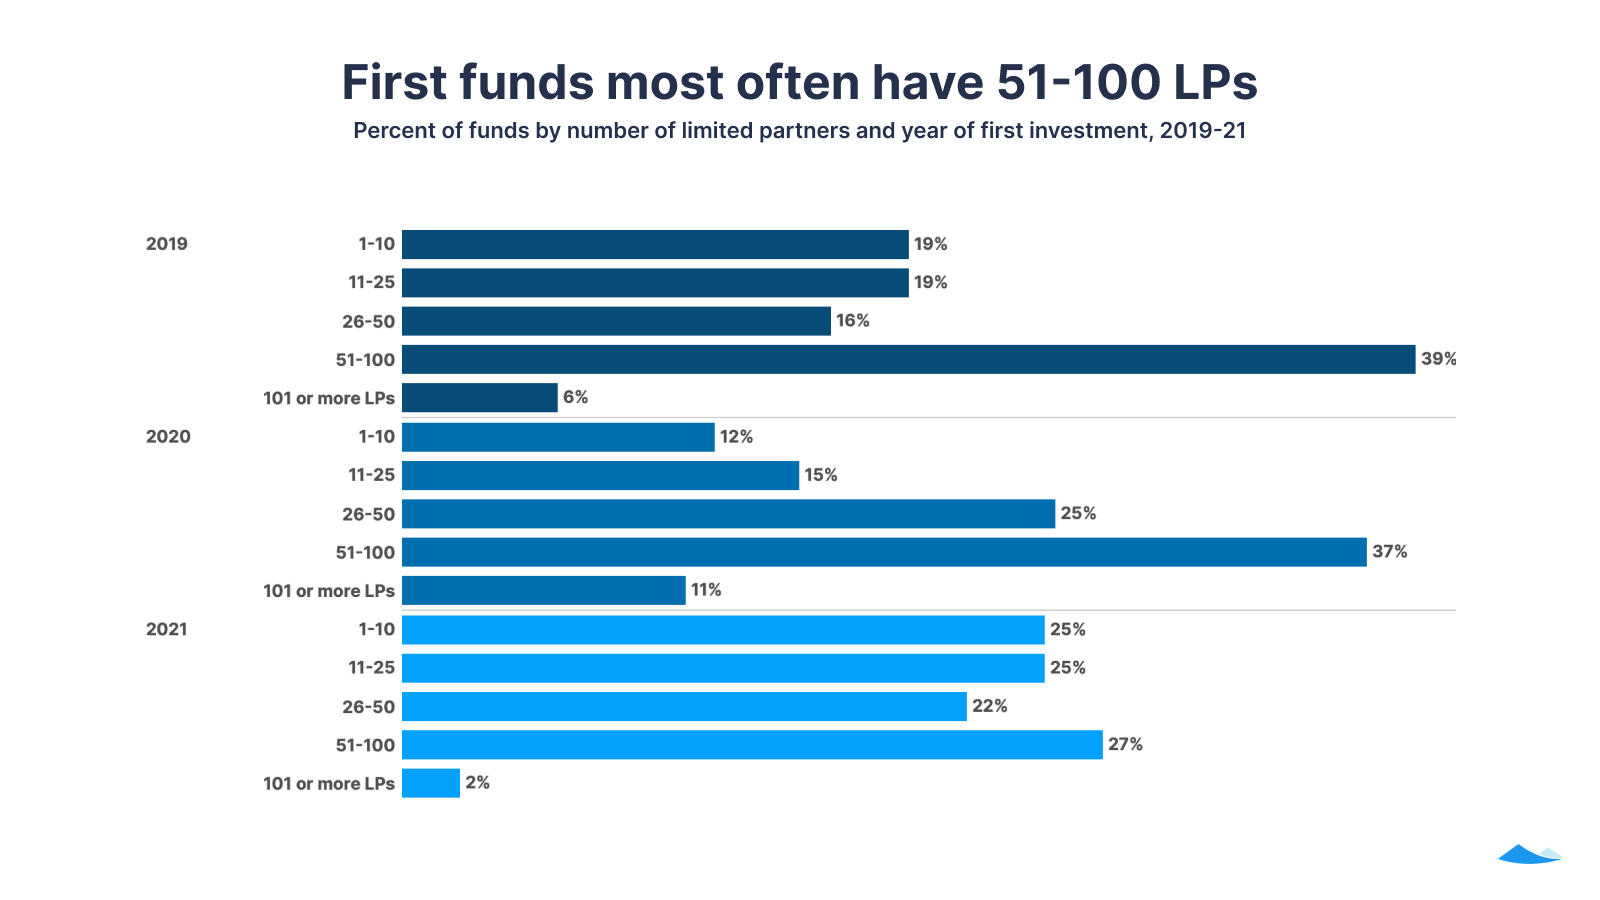 First funds most often have 51-100 LPs: Percent of funds by number of limited partners and year of first investment, 2019-21